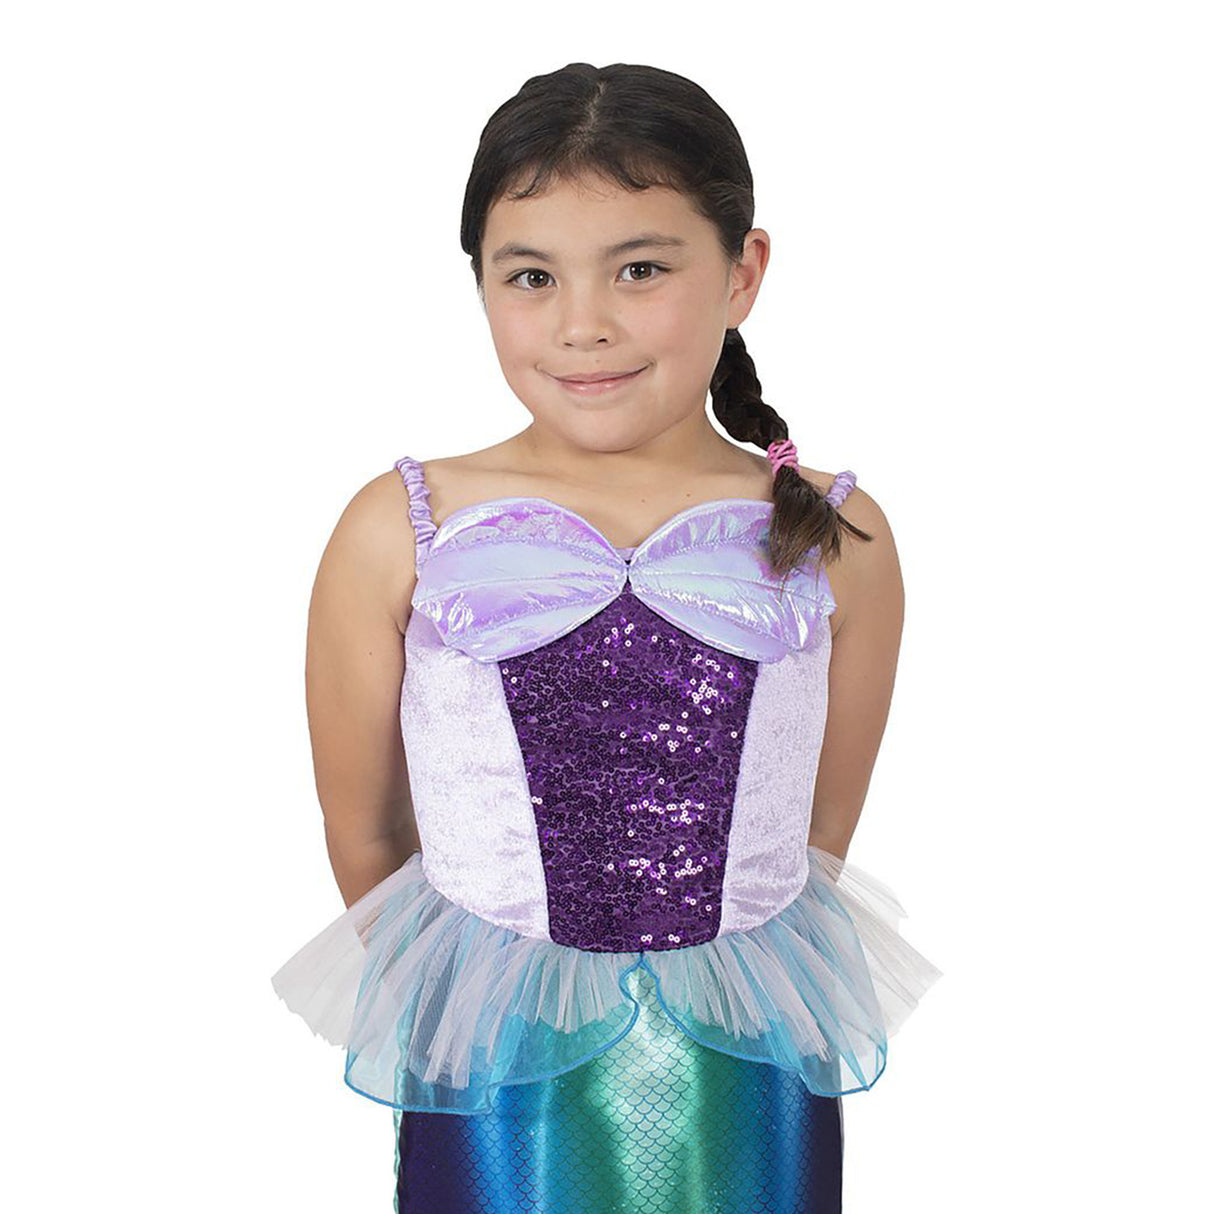 Rubies Ariel Tlm Live Action Deluxe Costume (9-10 years)